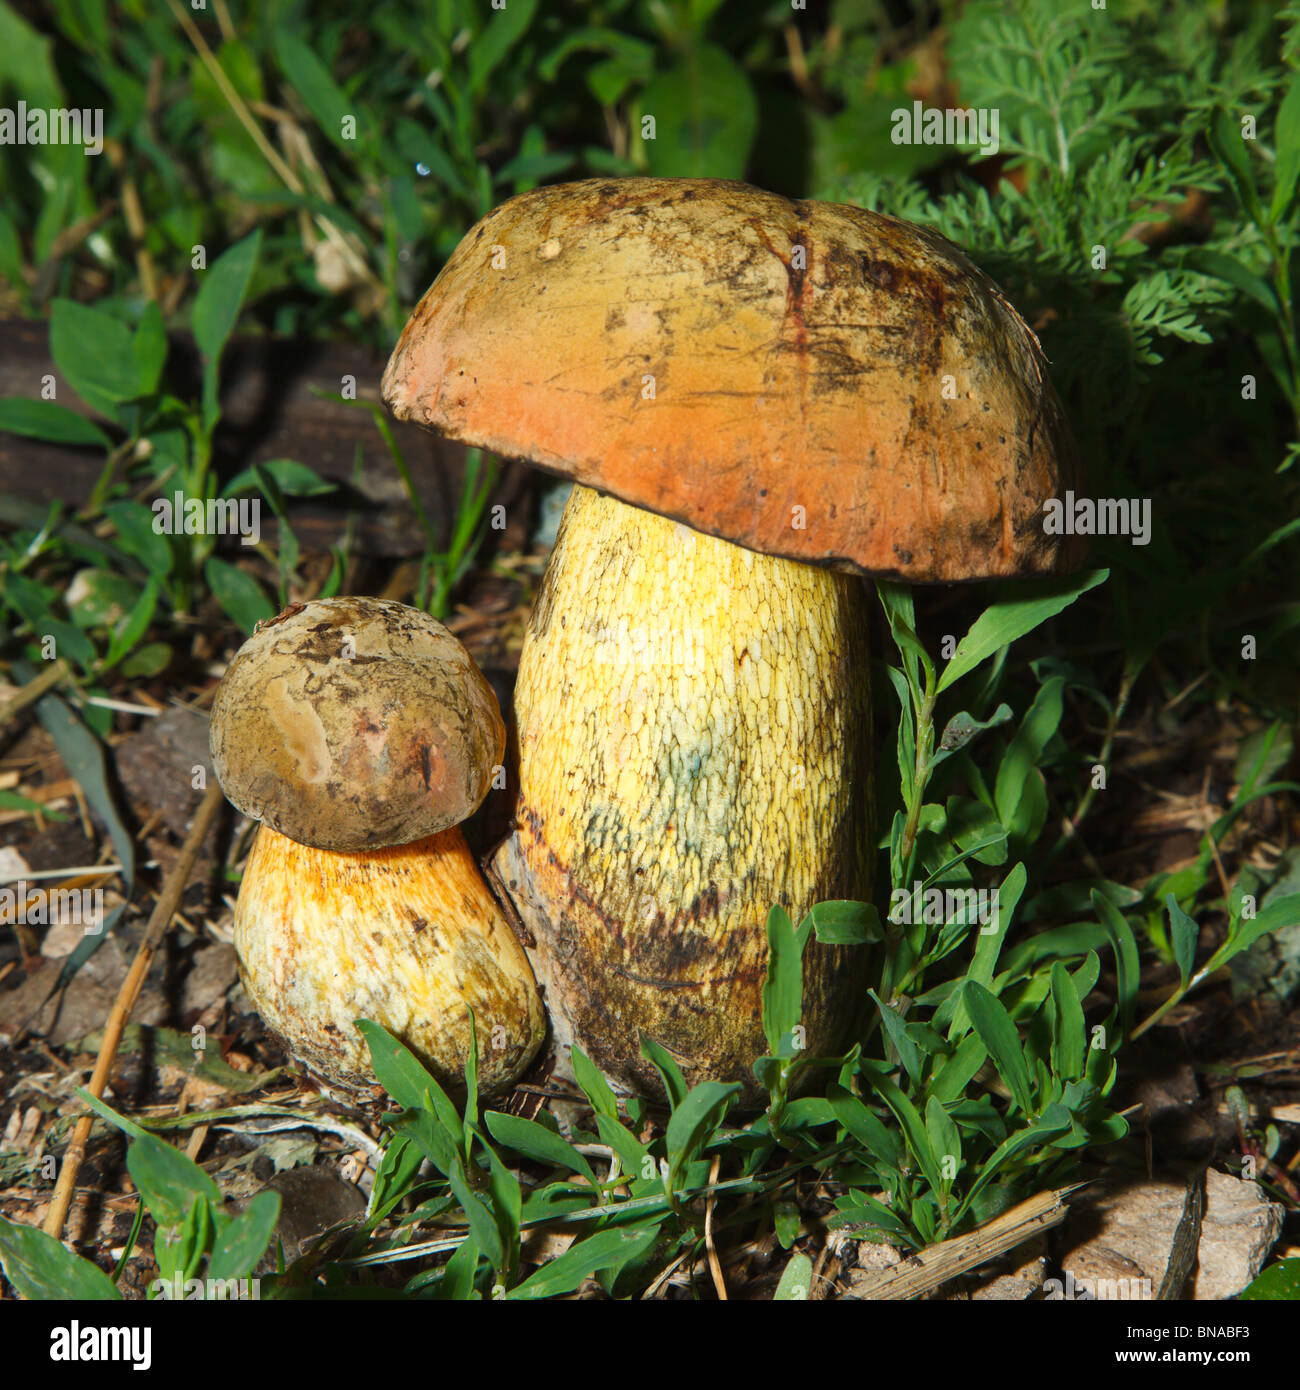 Edible fungi growing on the earth in the wild nature. Stock Photo